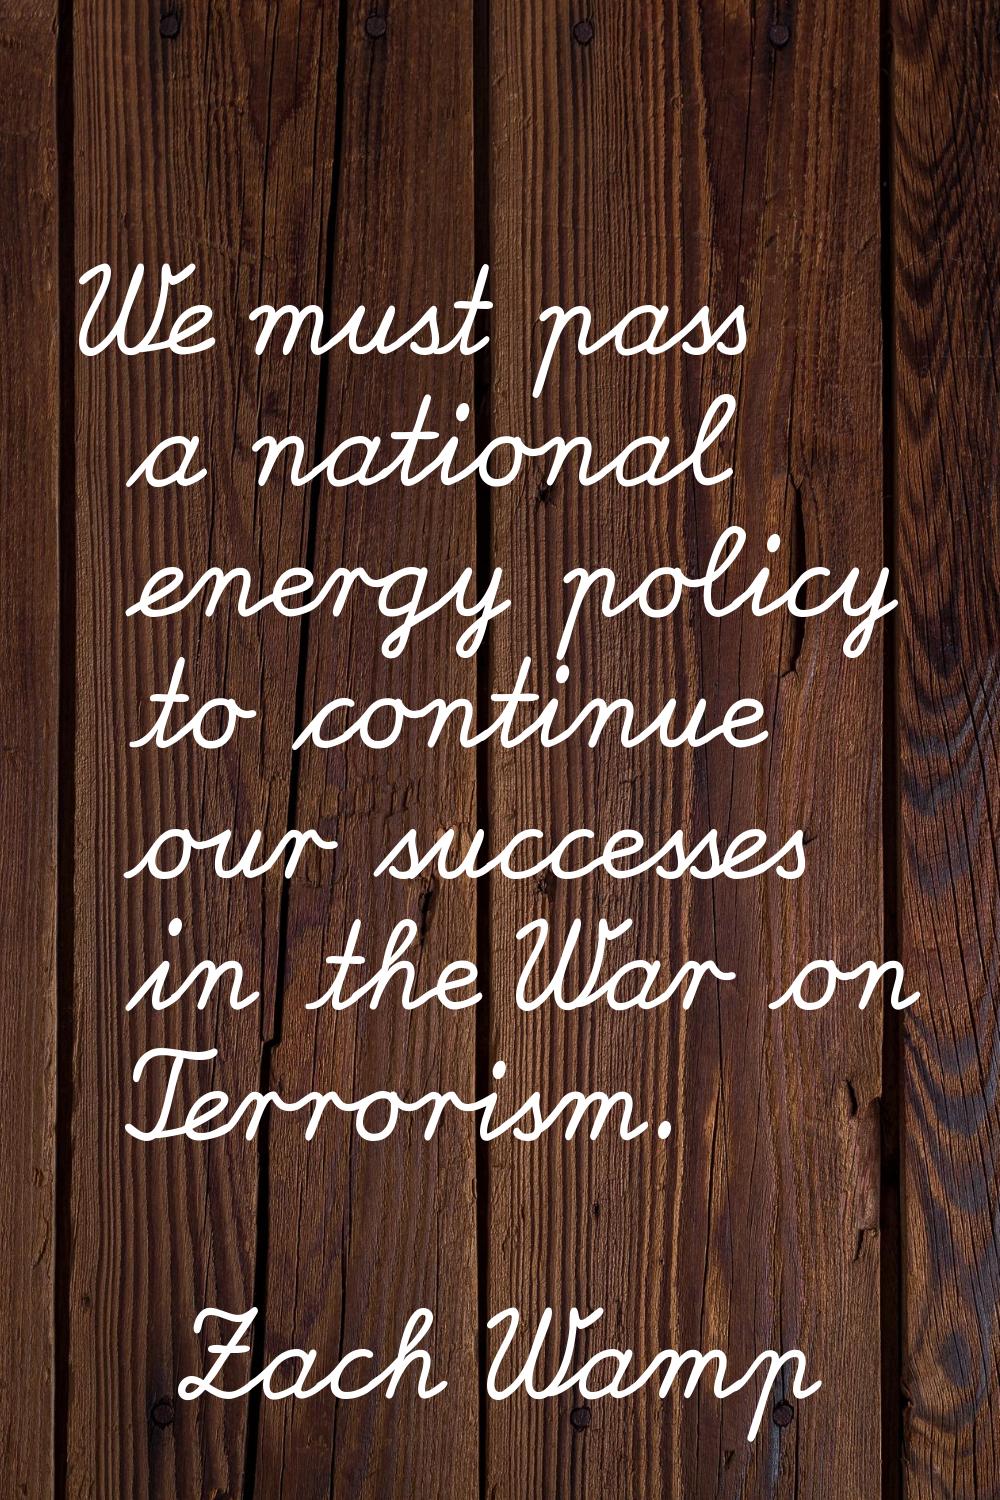 We must pass a national energy policy to continue our successes in the War on Terrorism.